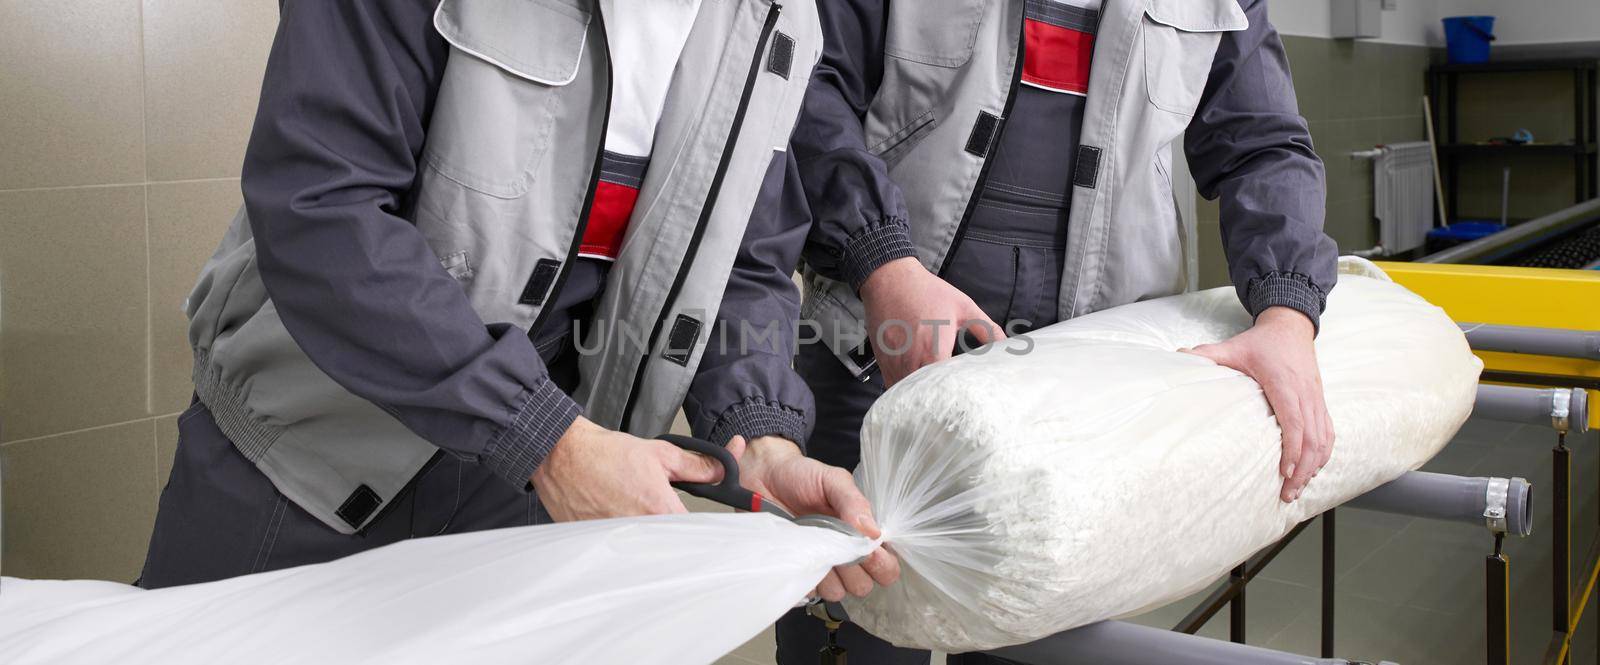 Men workers packing carpet in a plastic bag after cleaning it in automatic washing machine and dryer